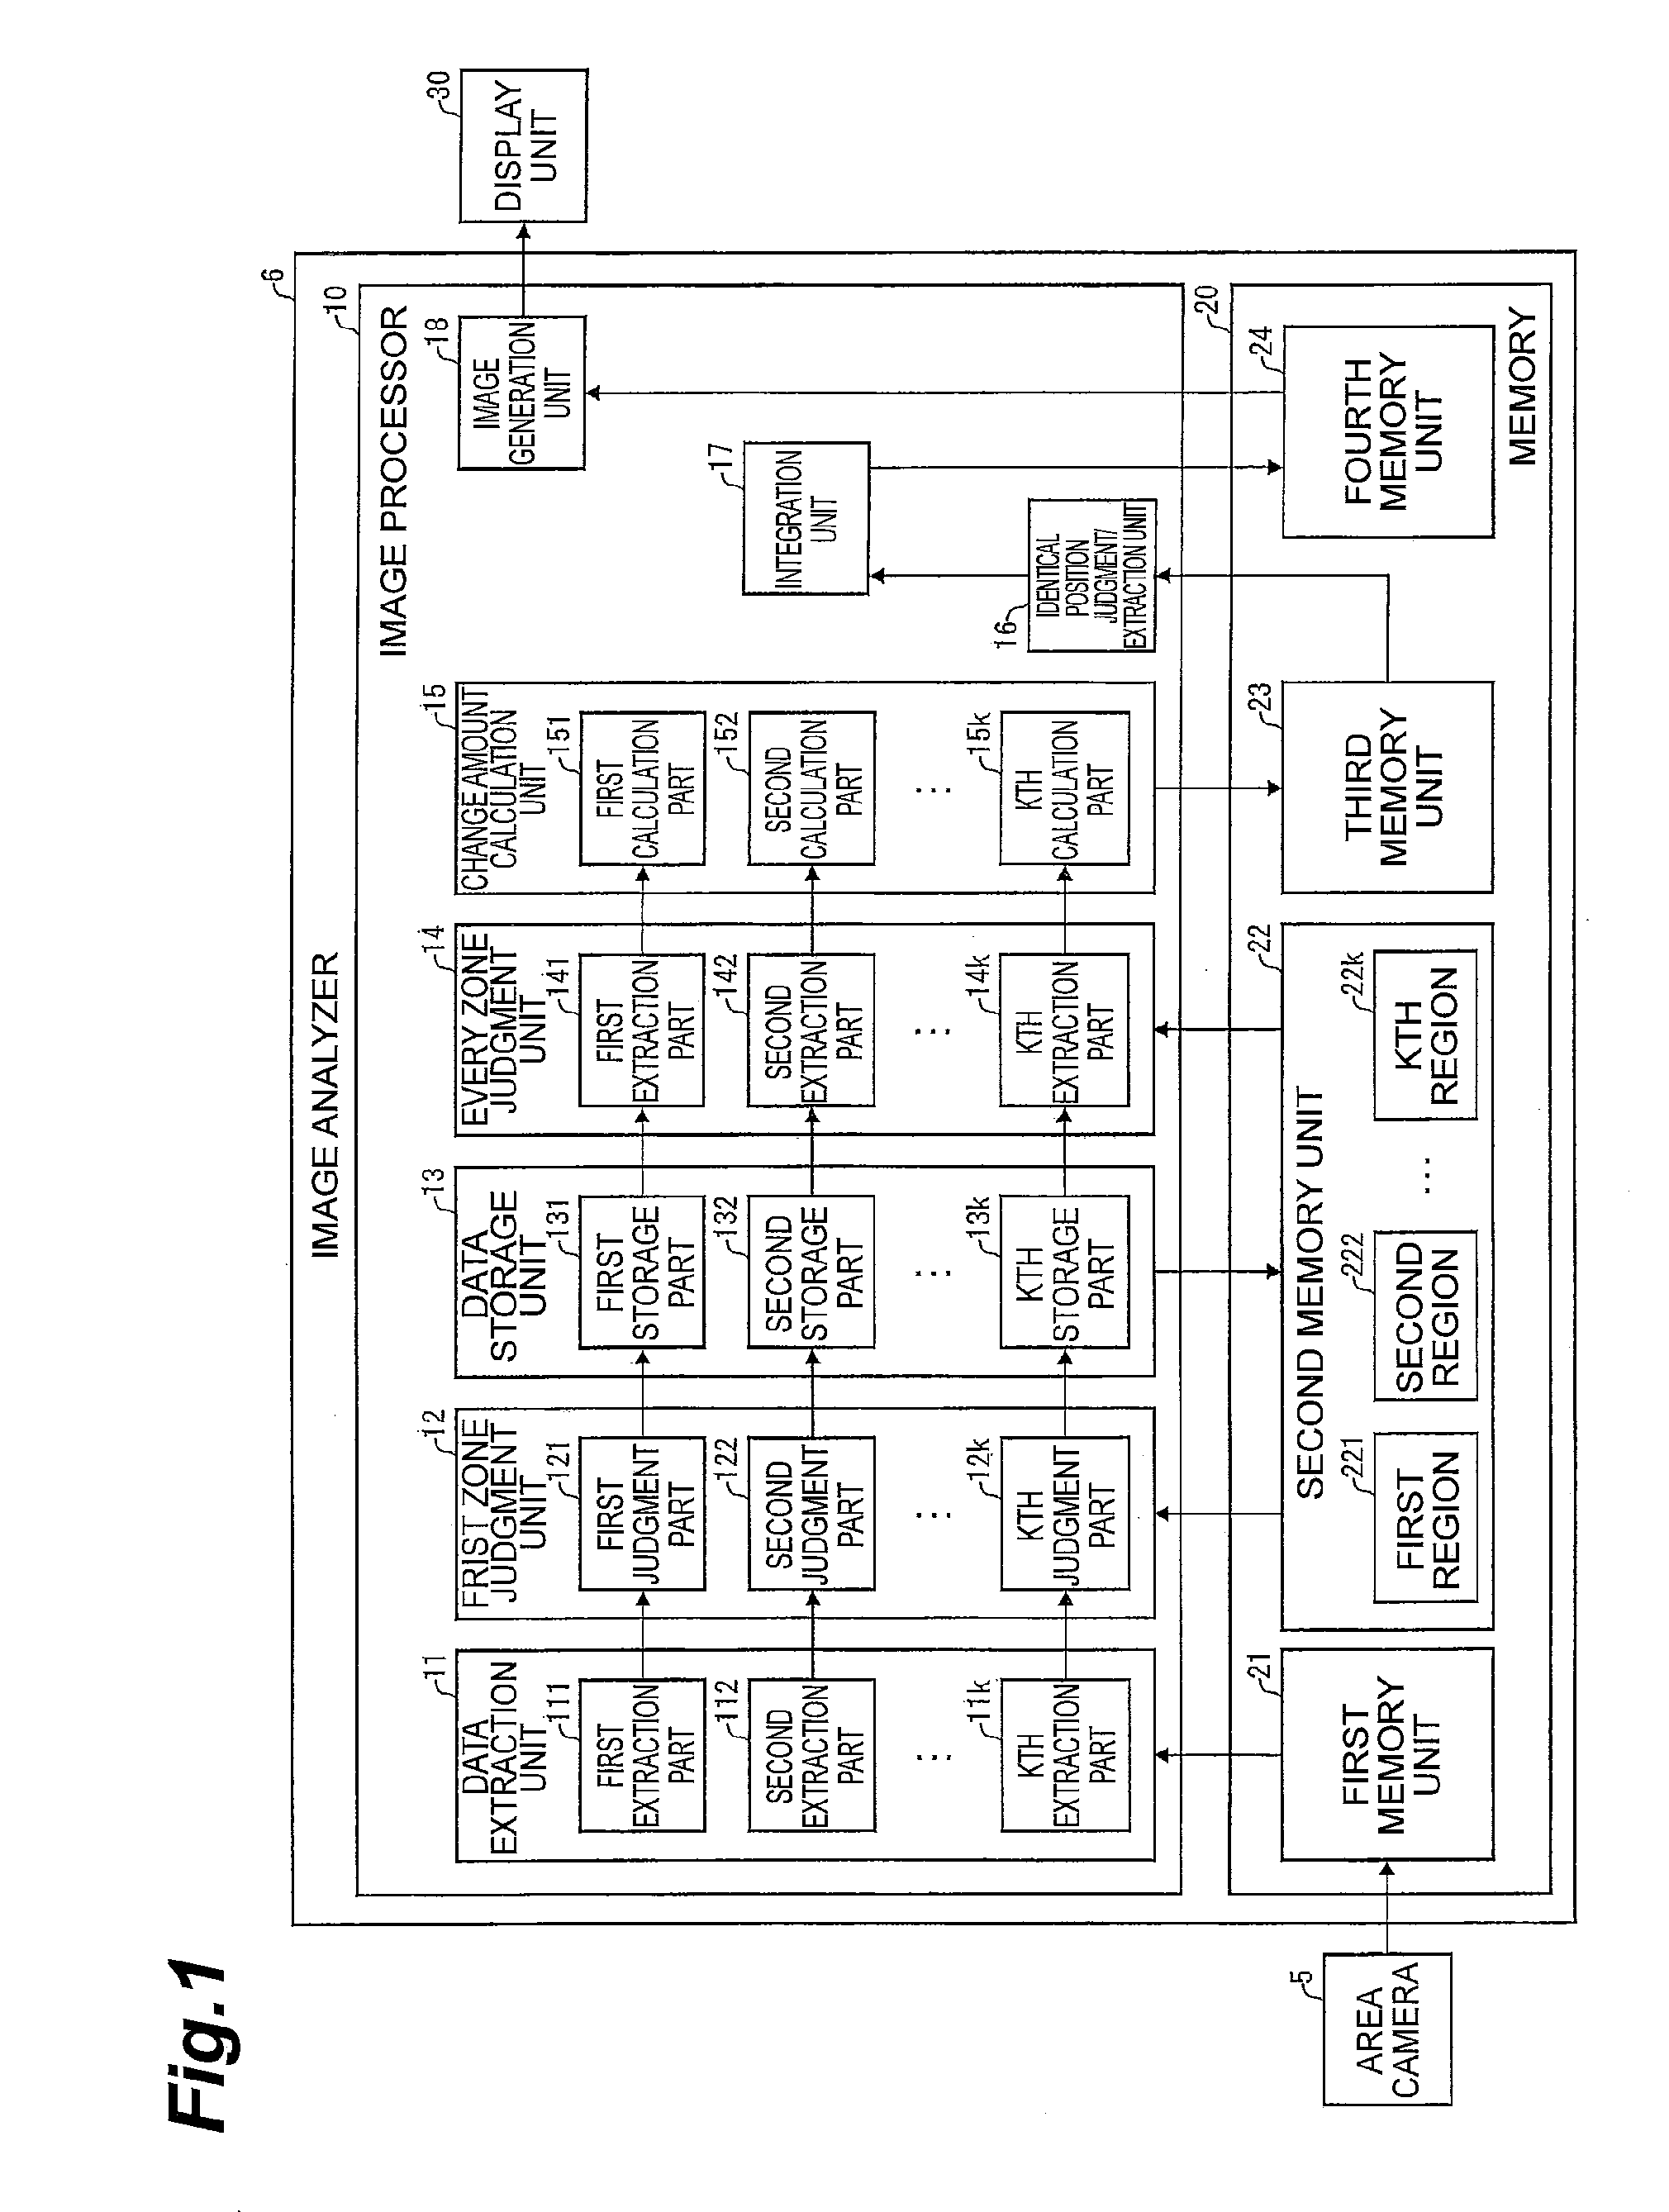 Image processing device for defect inspection and image processing method for defect inspection